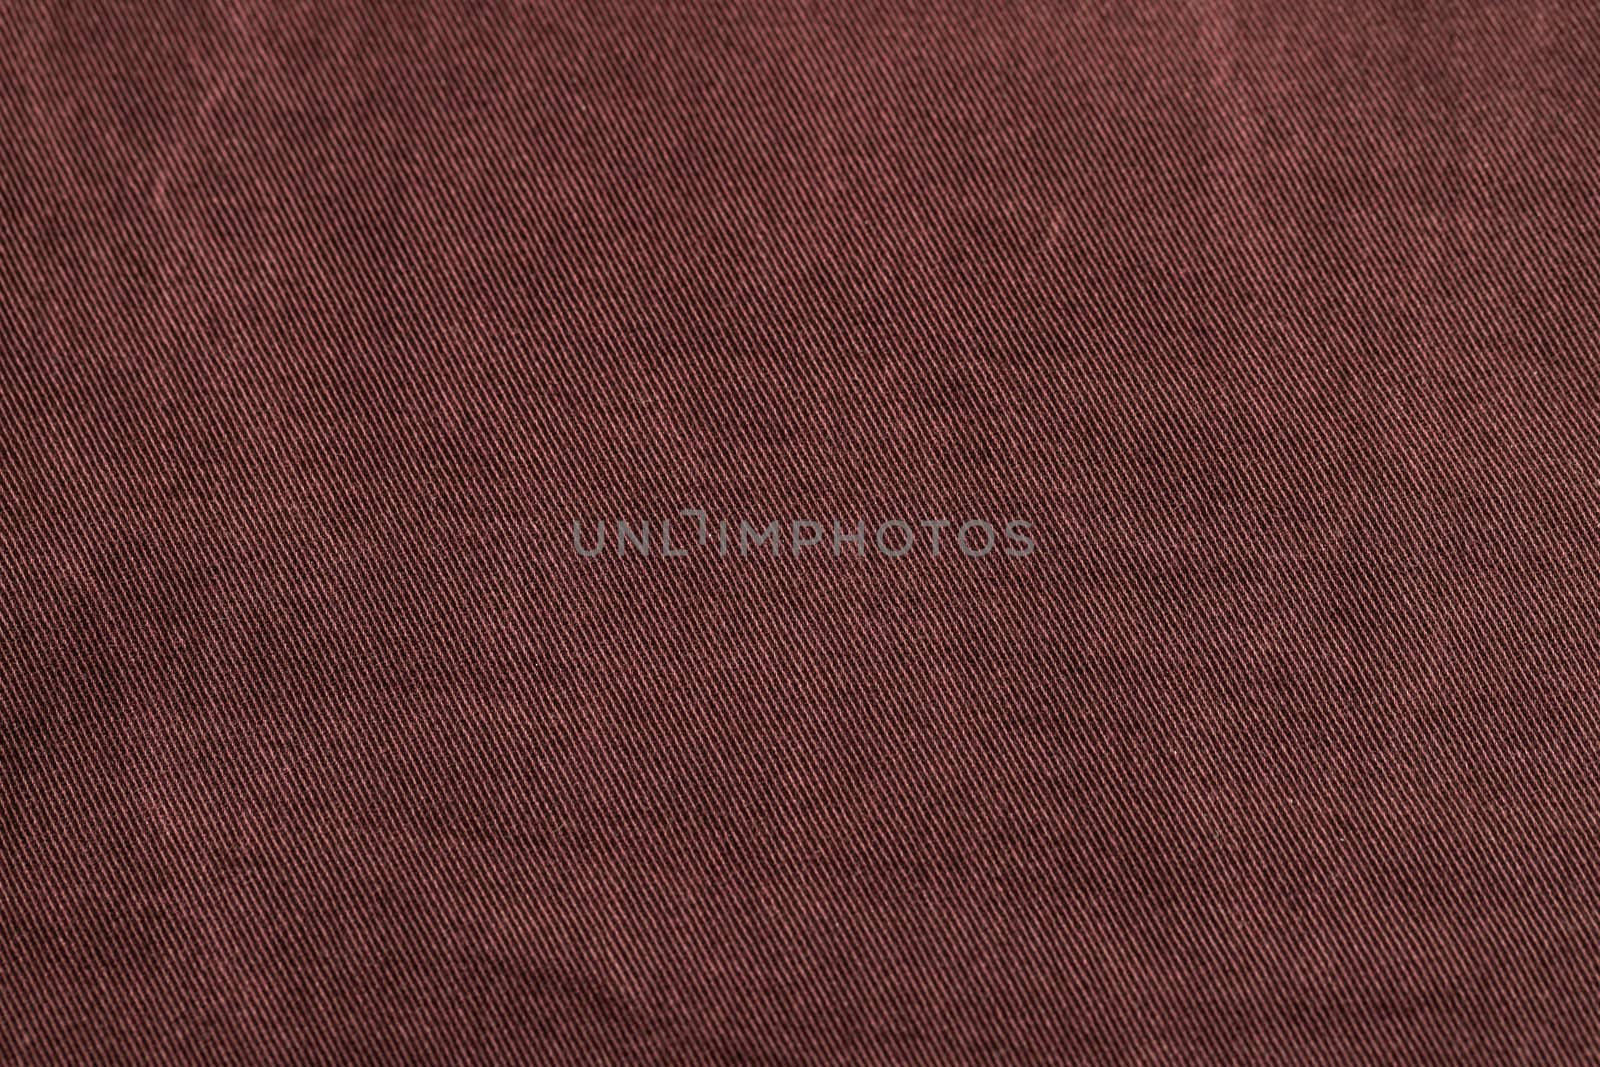 Dark cherry Denim Texture. Denim background of jeans of unusual color, place for text, place for copying.